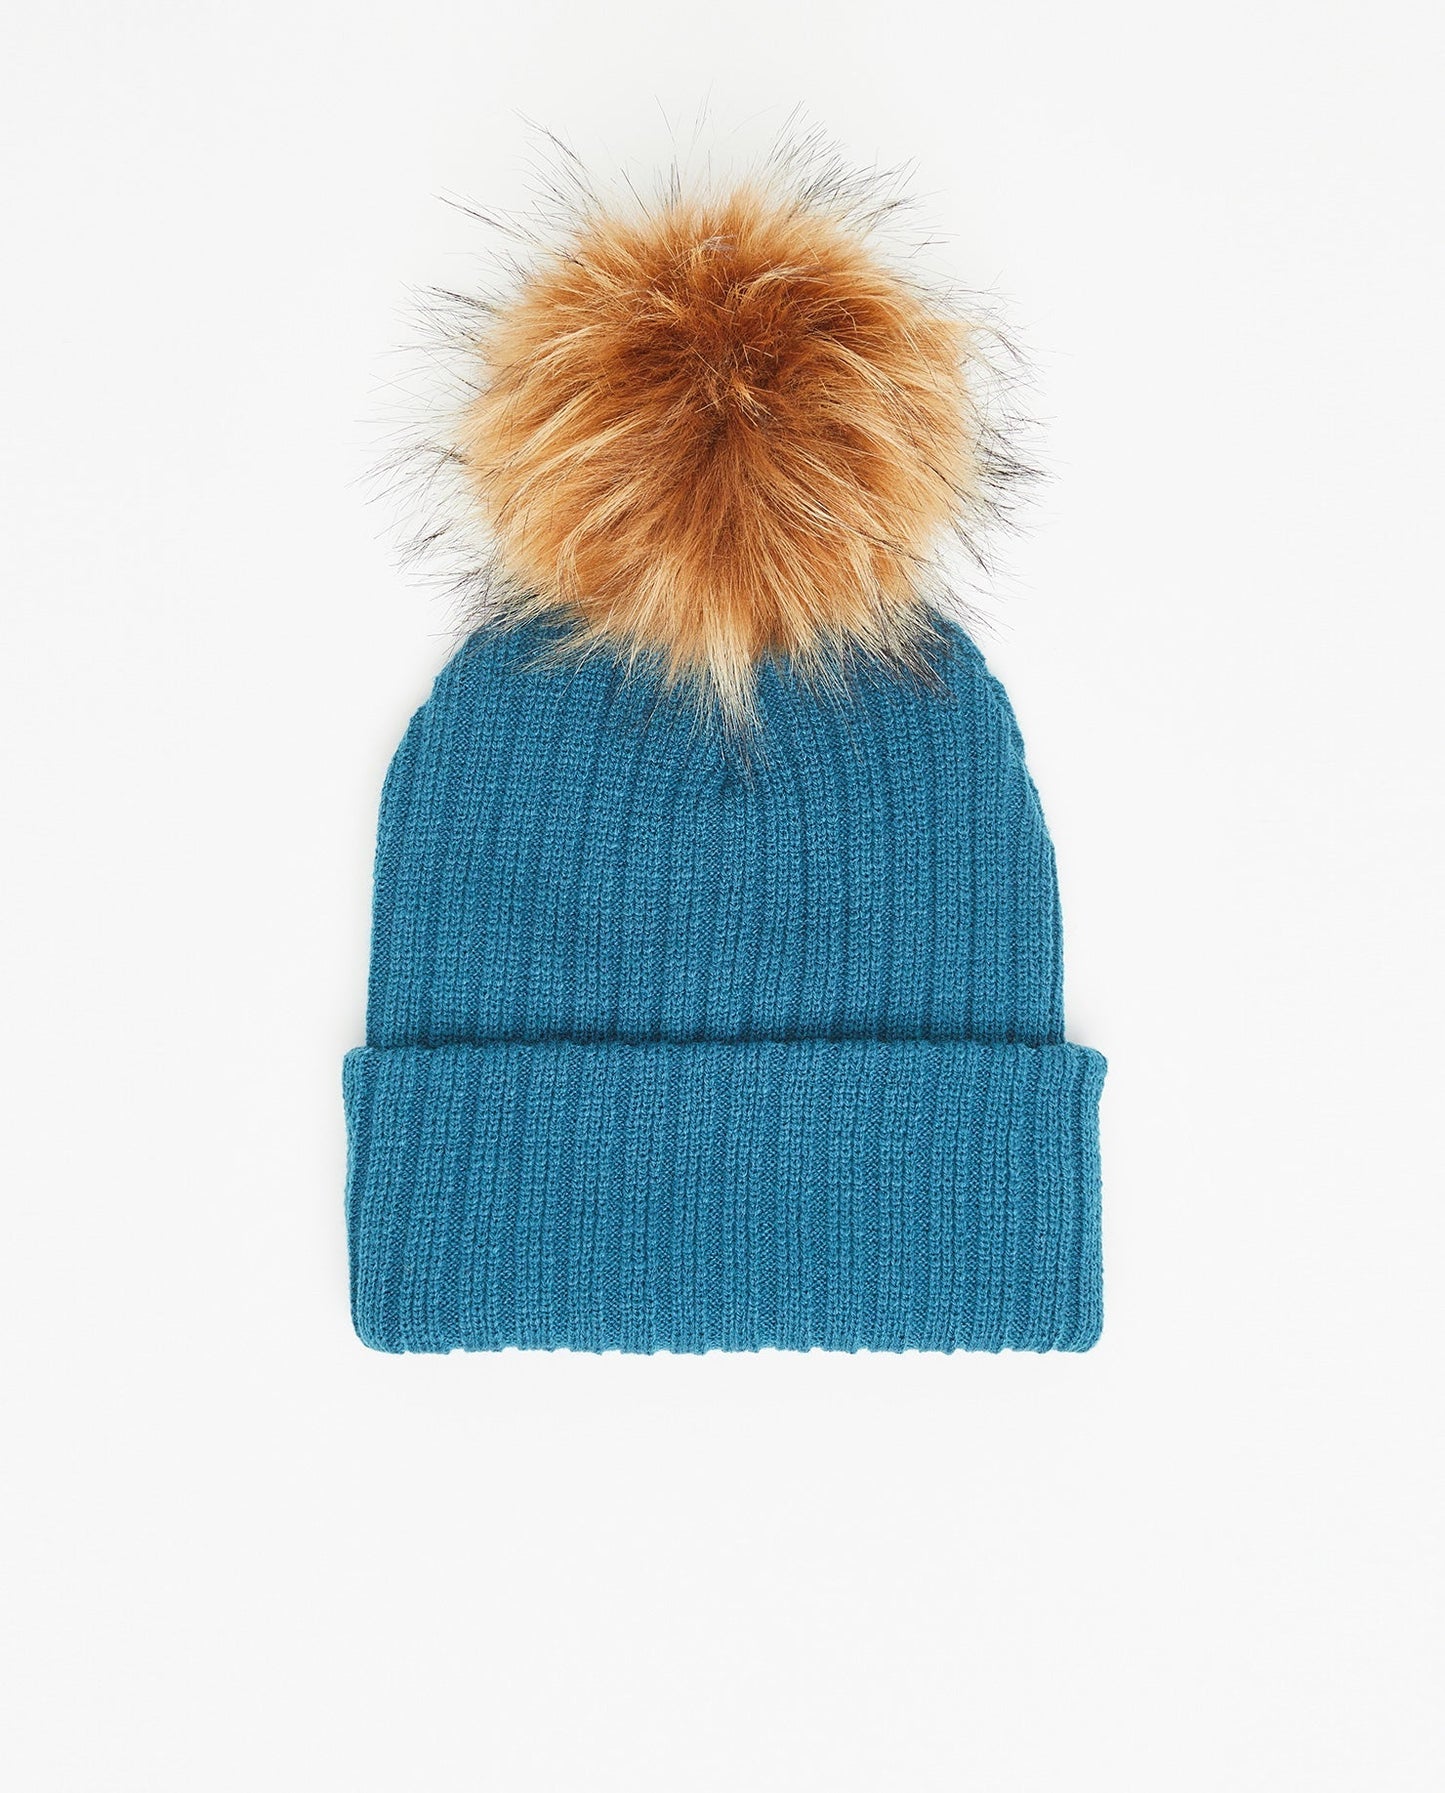 Turquoise Knit Beanie